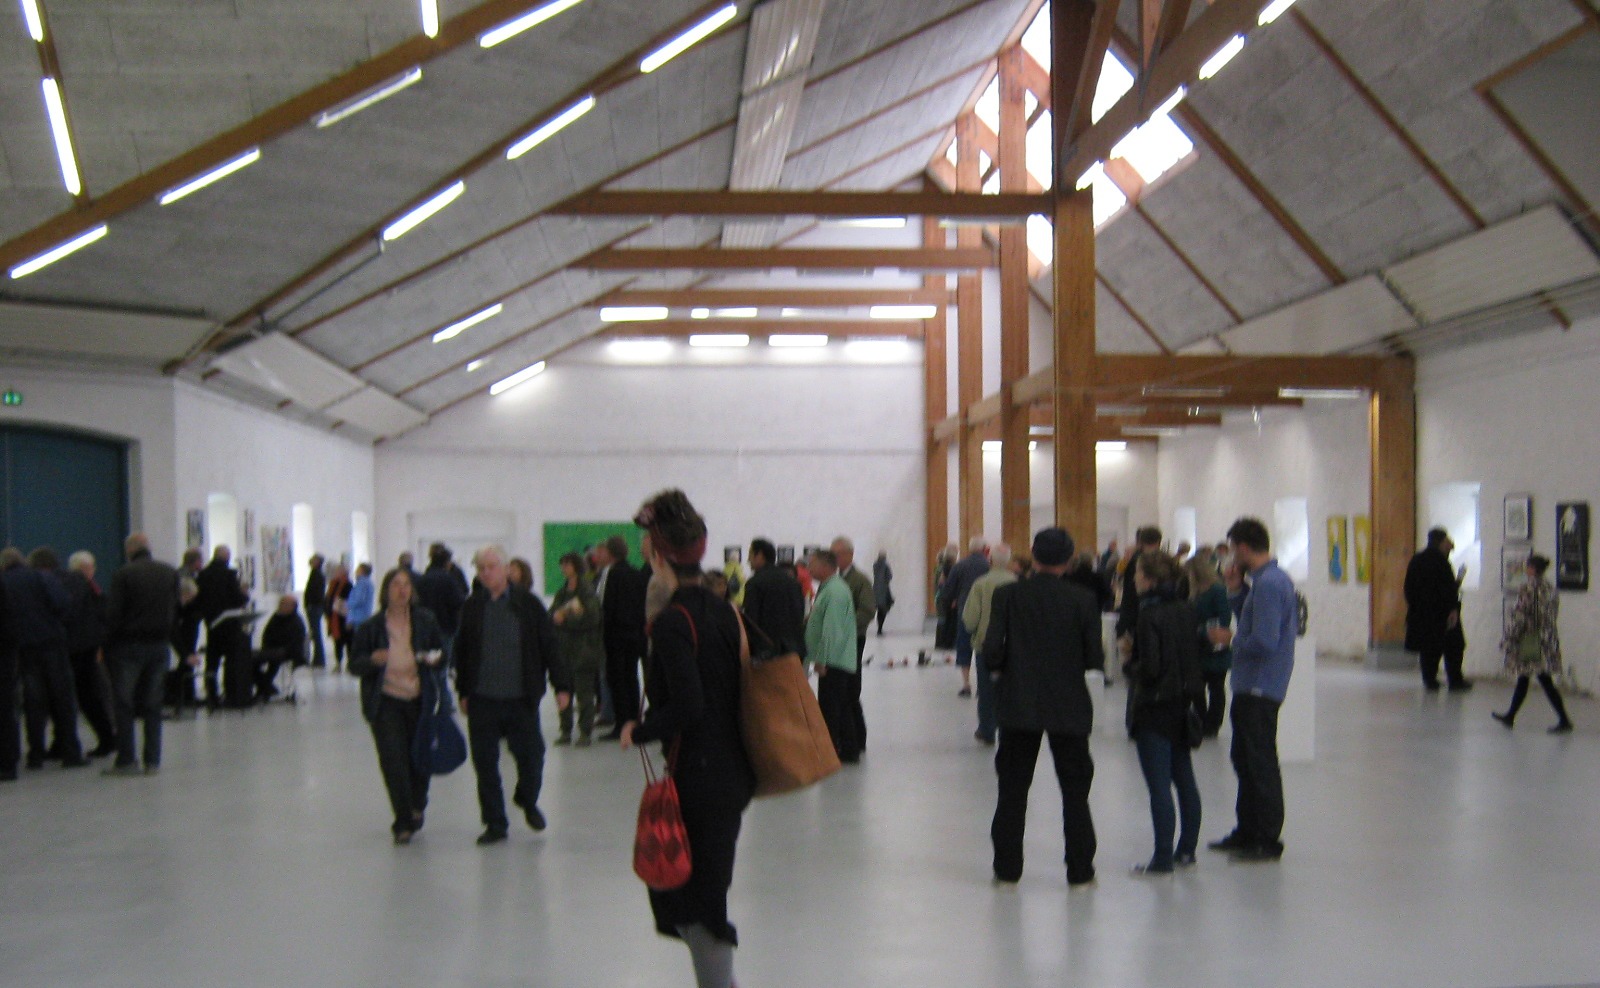 The Exhibition Hall in Holbk